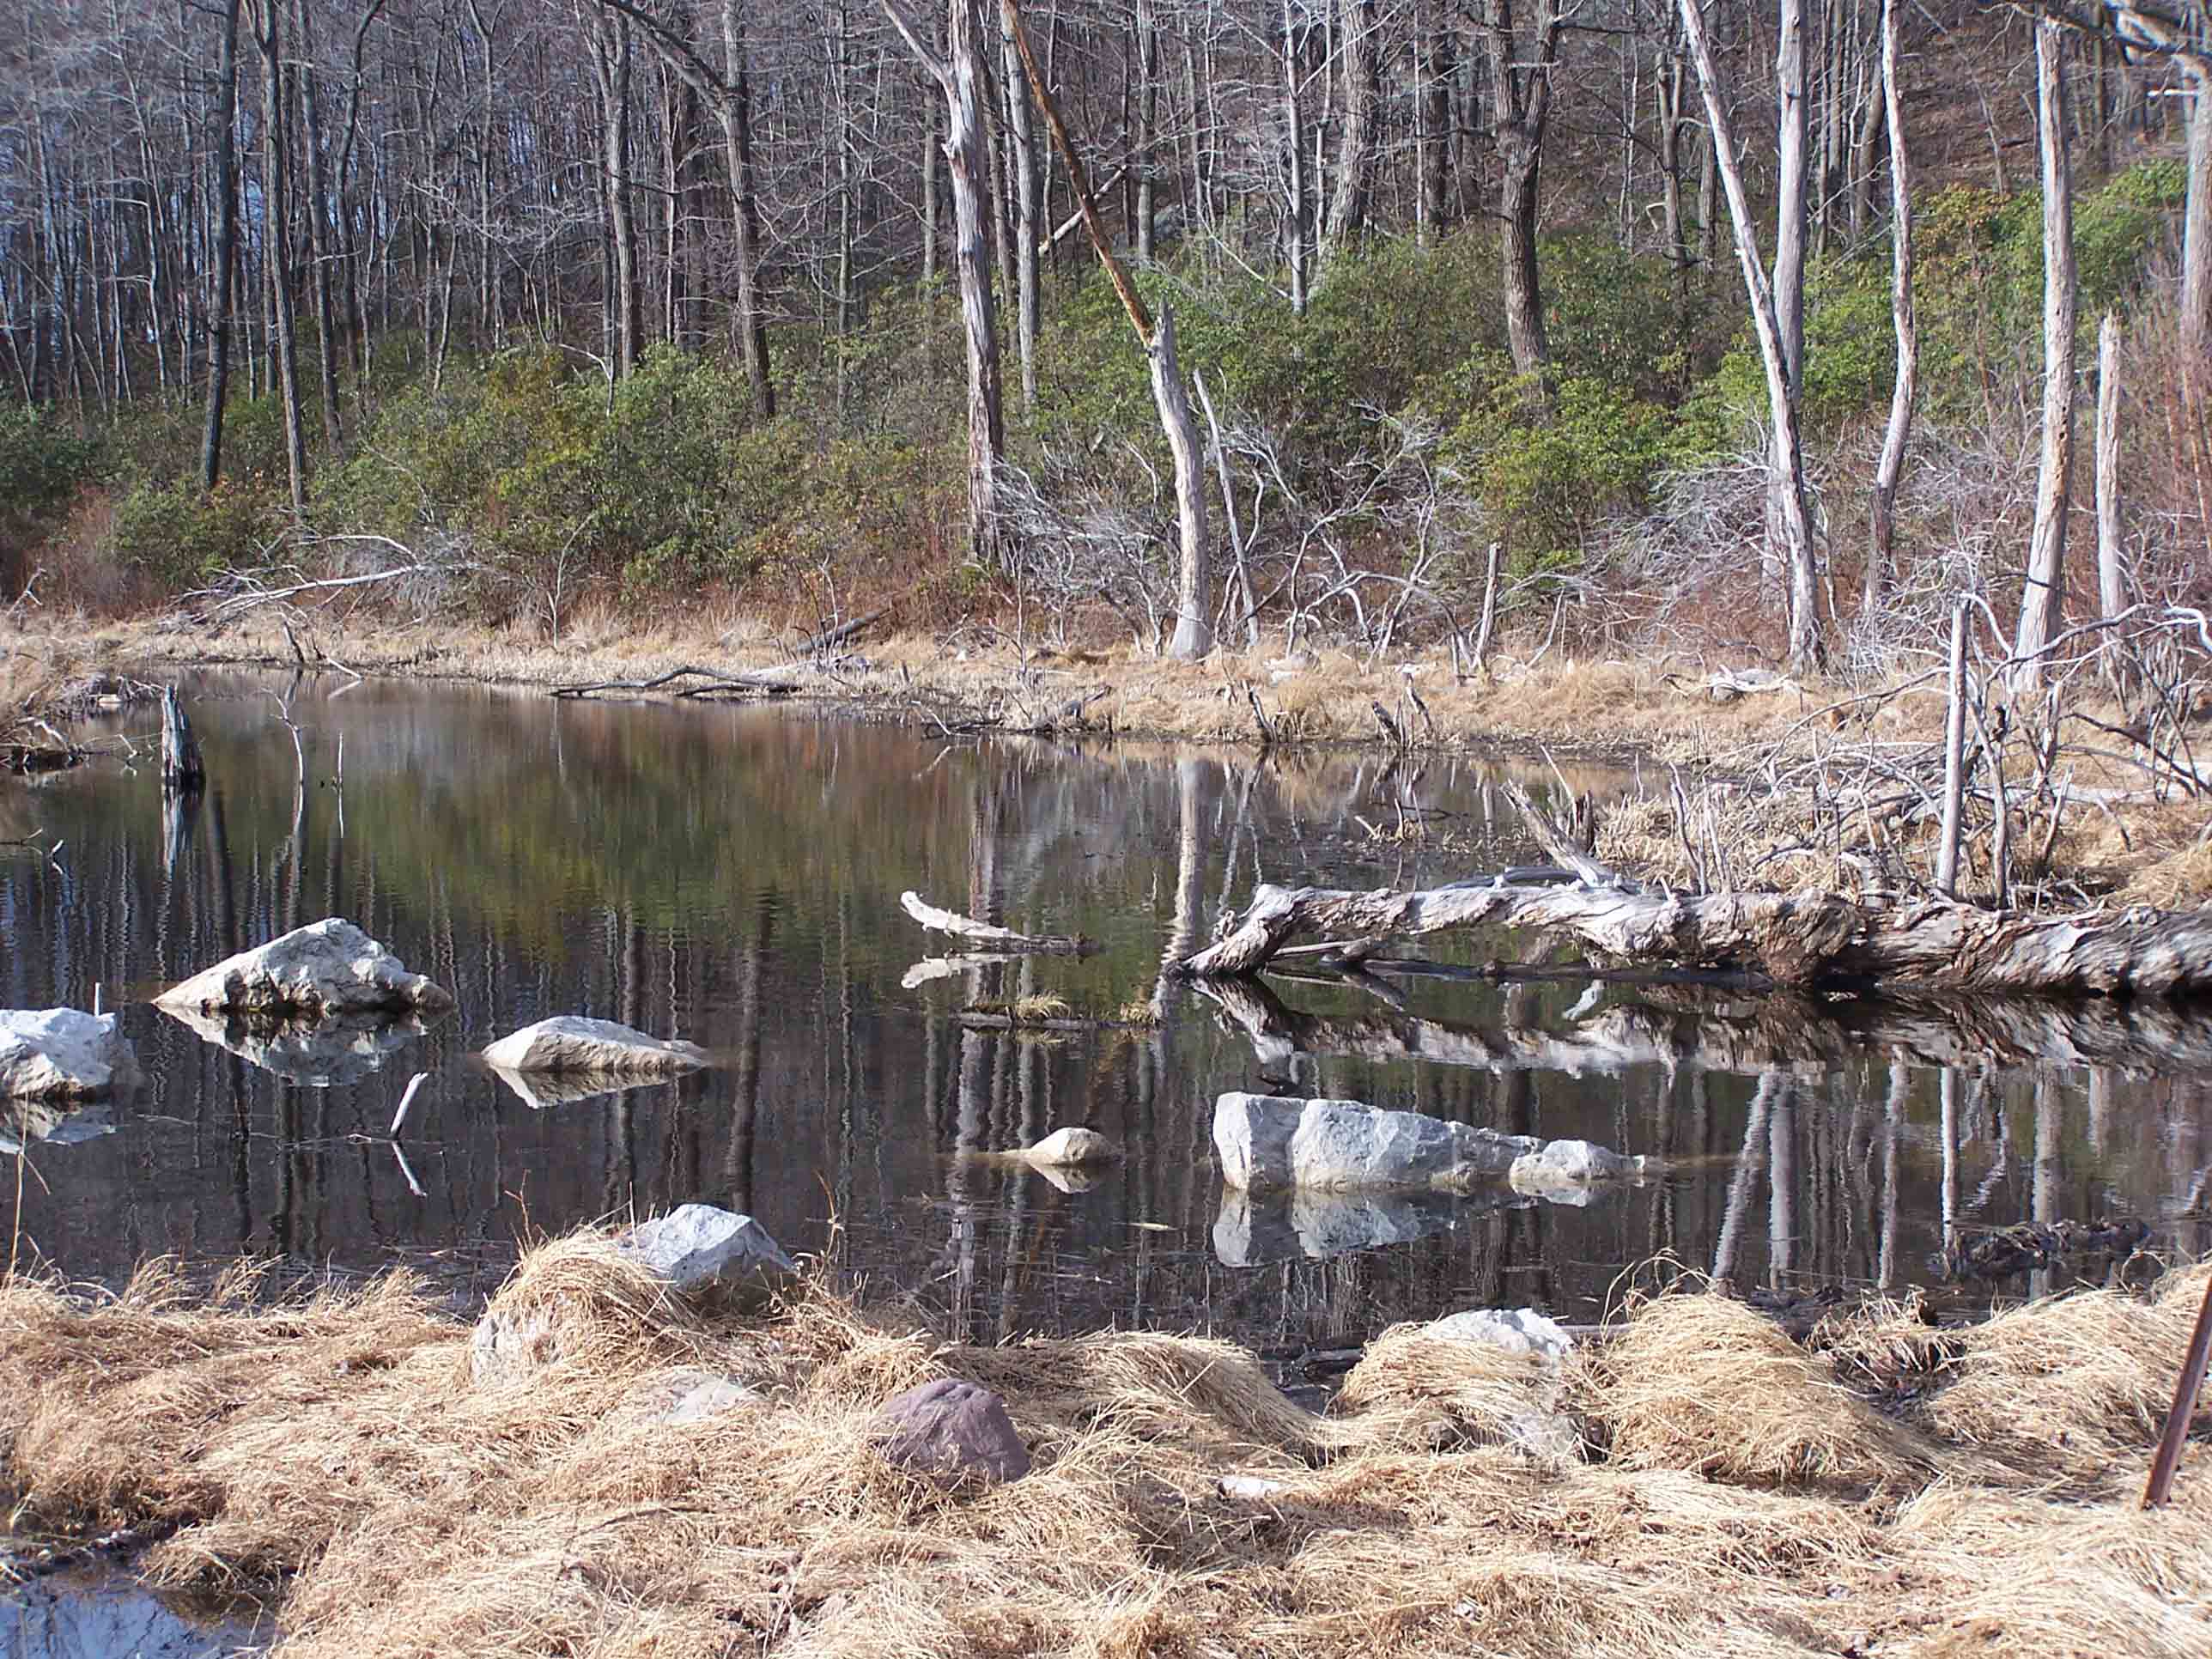 mm 14.0 - Beaver Pond. Courtesy at@rohland.org